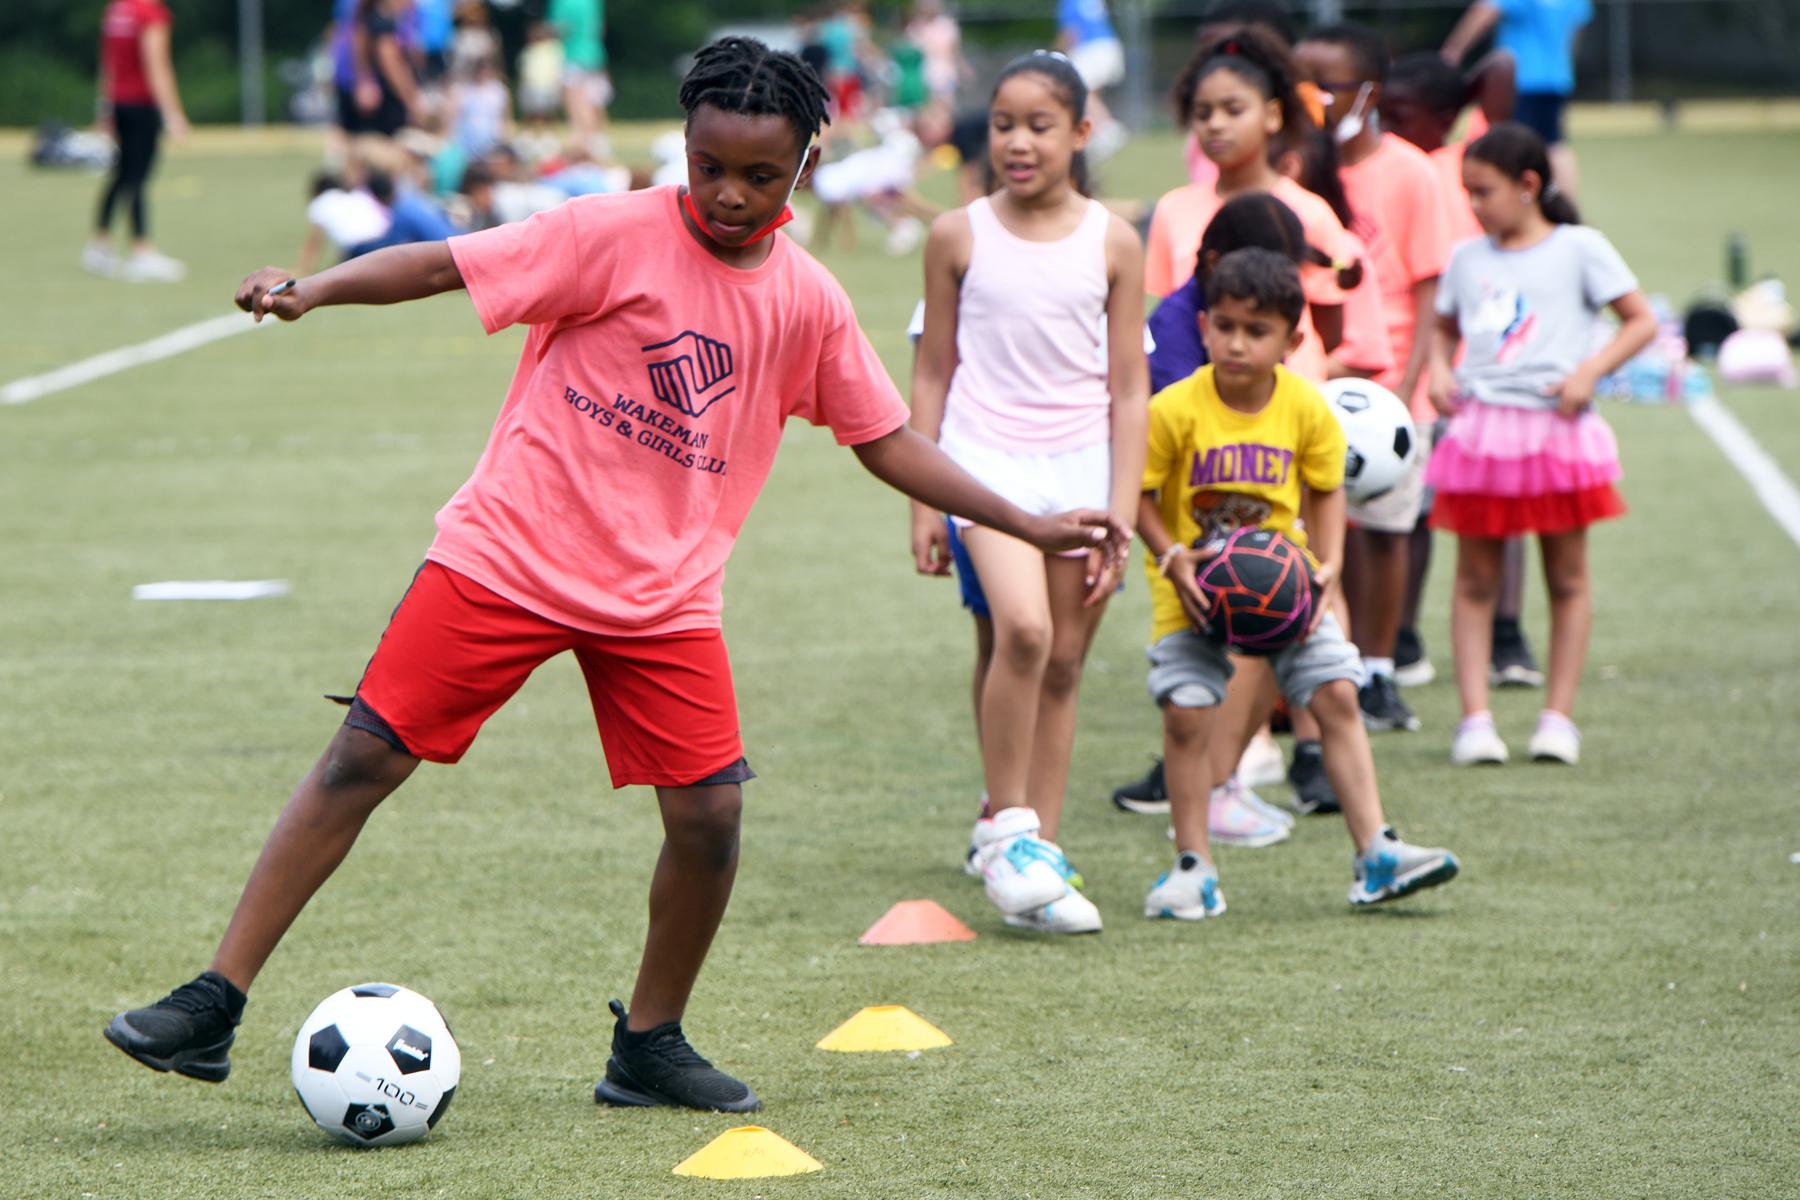 Wakeman Boys & Girls Club hosts soccer event in Southport